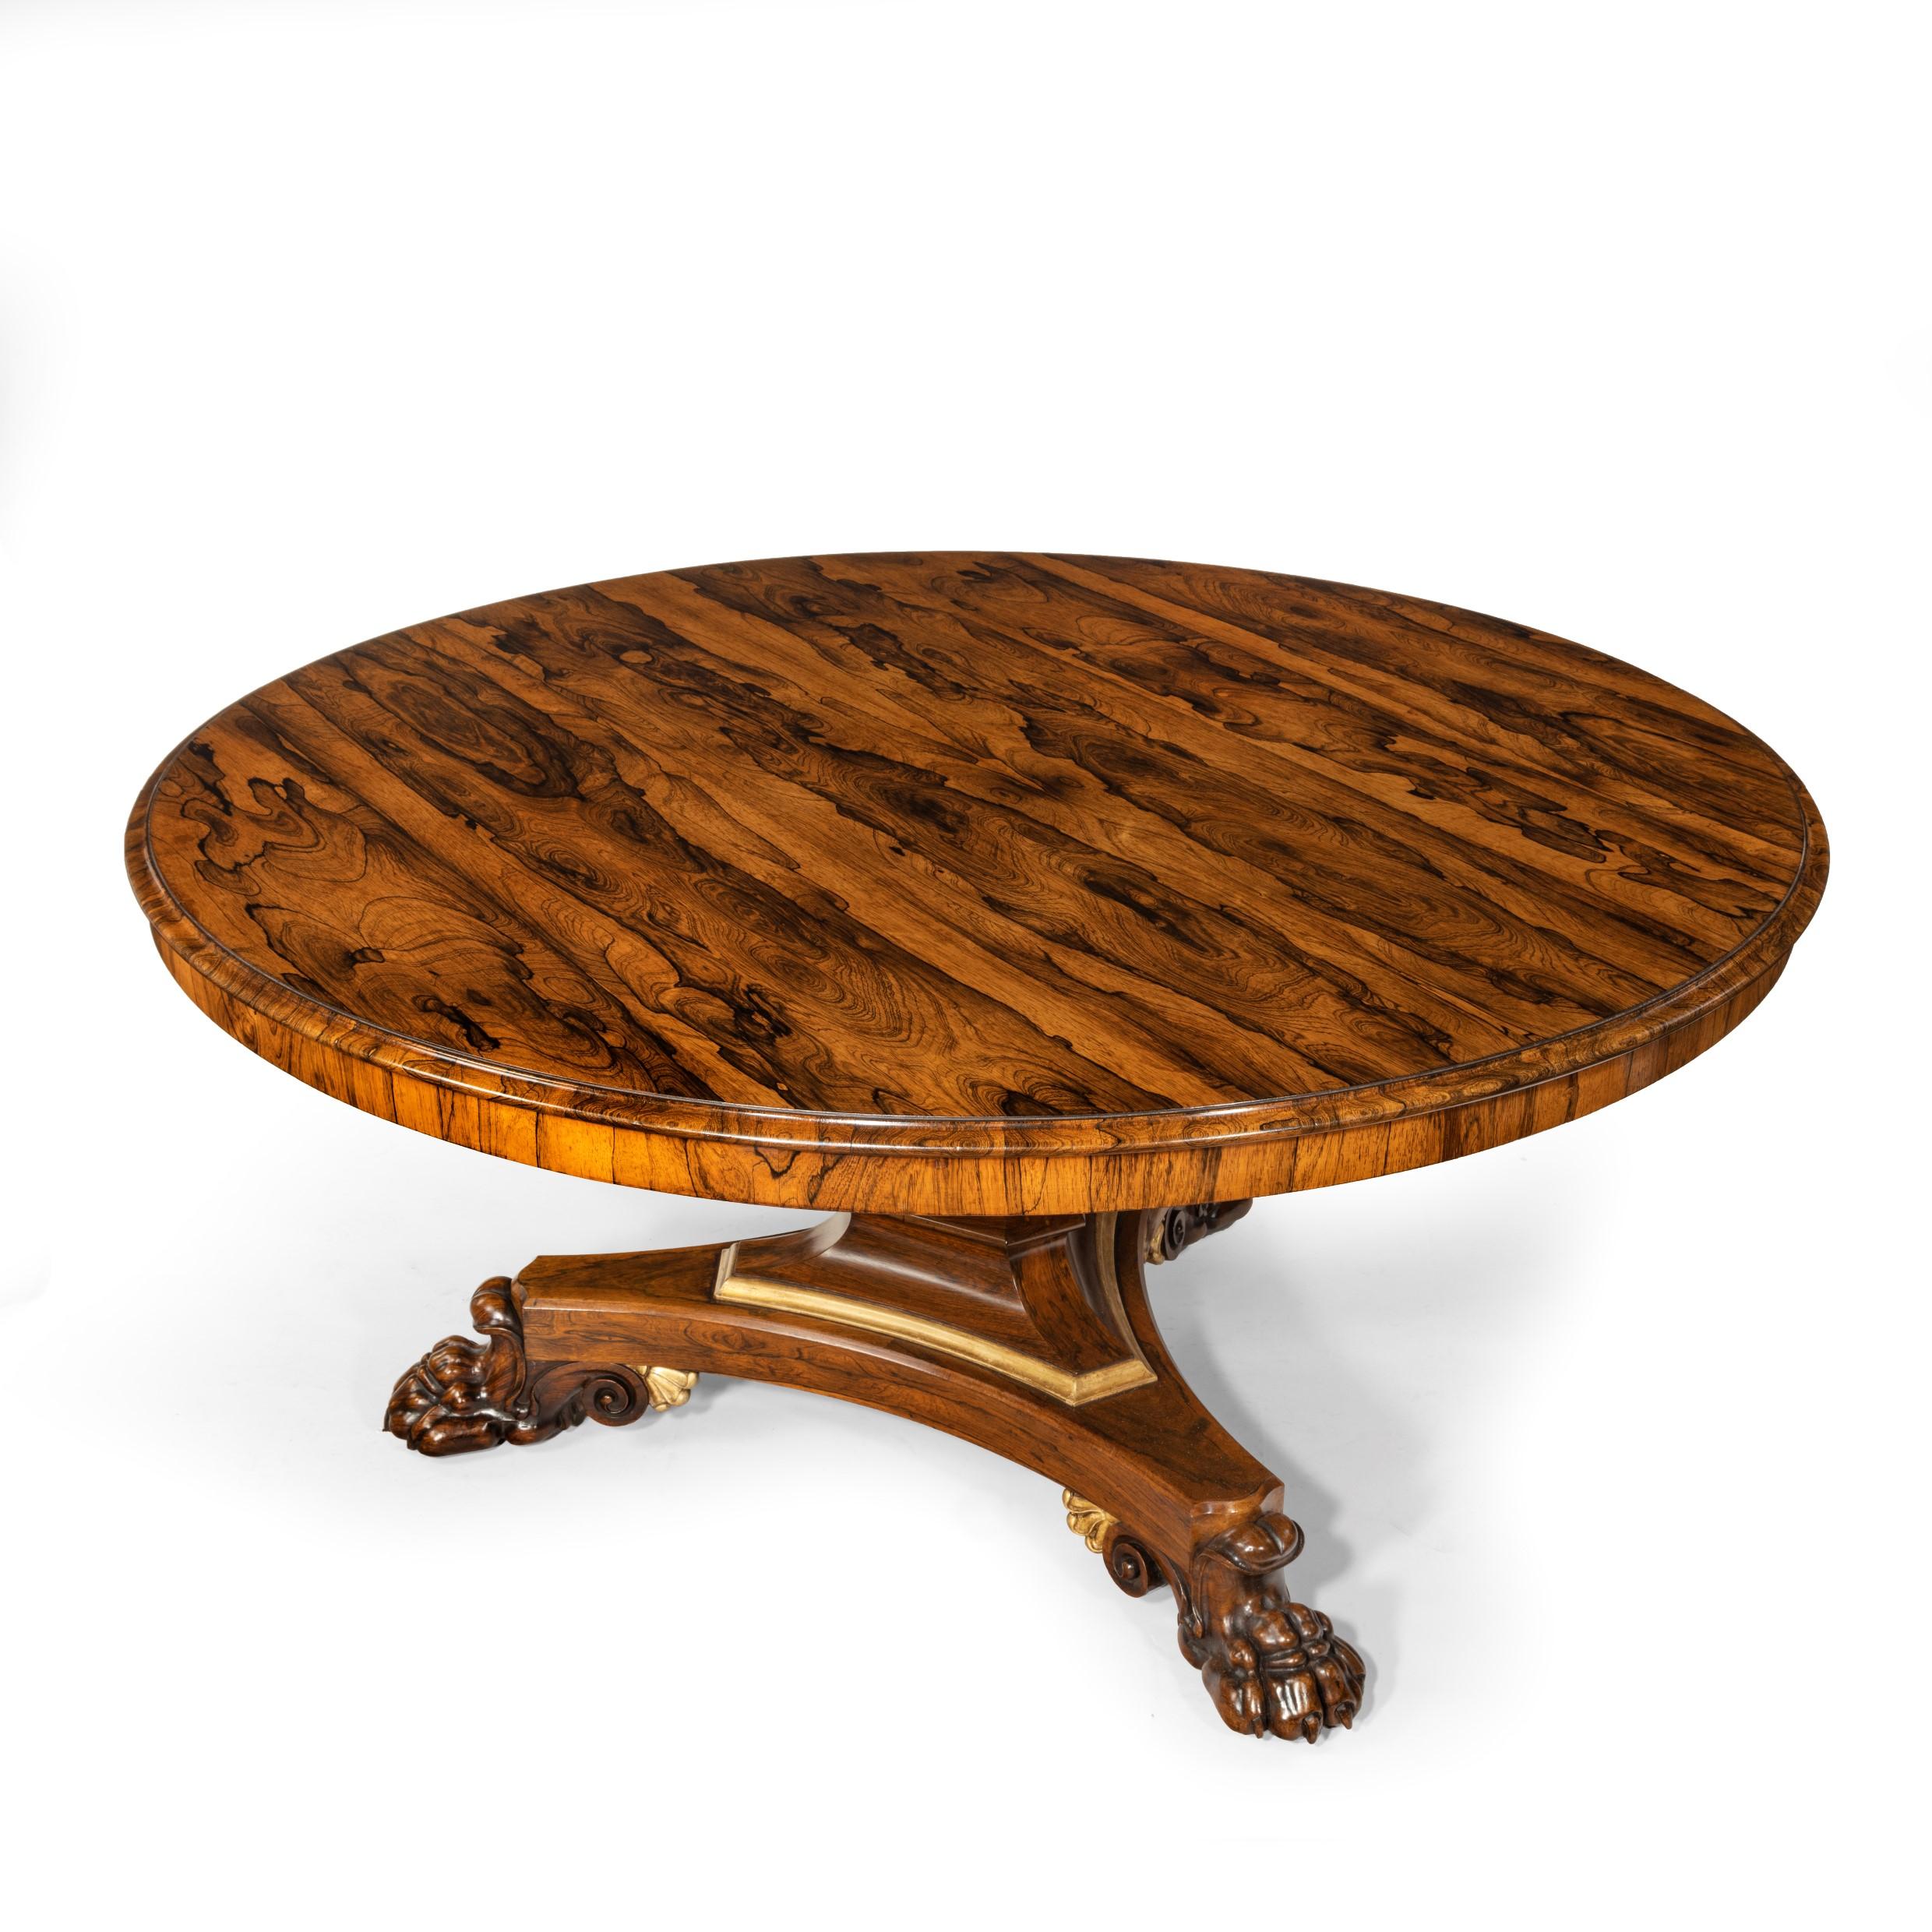 Regency Rosewood Five-Foot Tilt-Top Centre Table English, circa 1815 For Sale 1